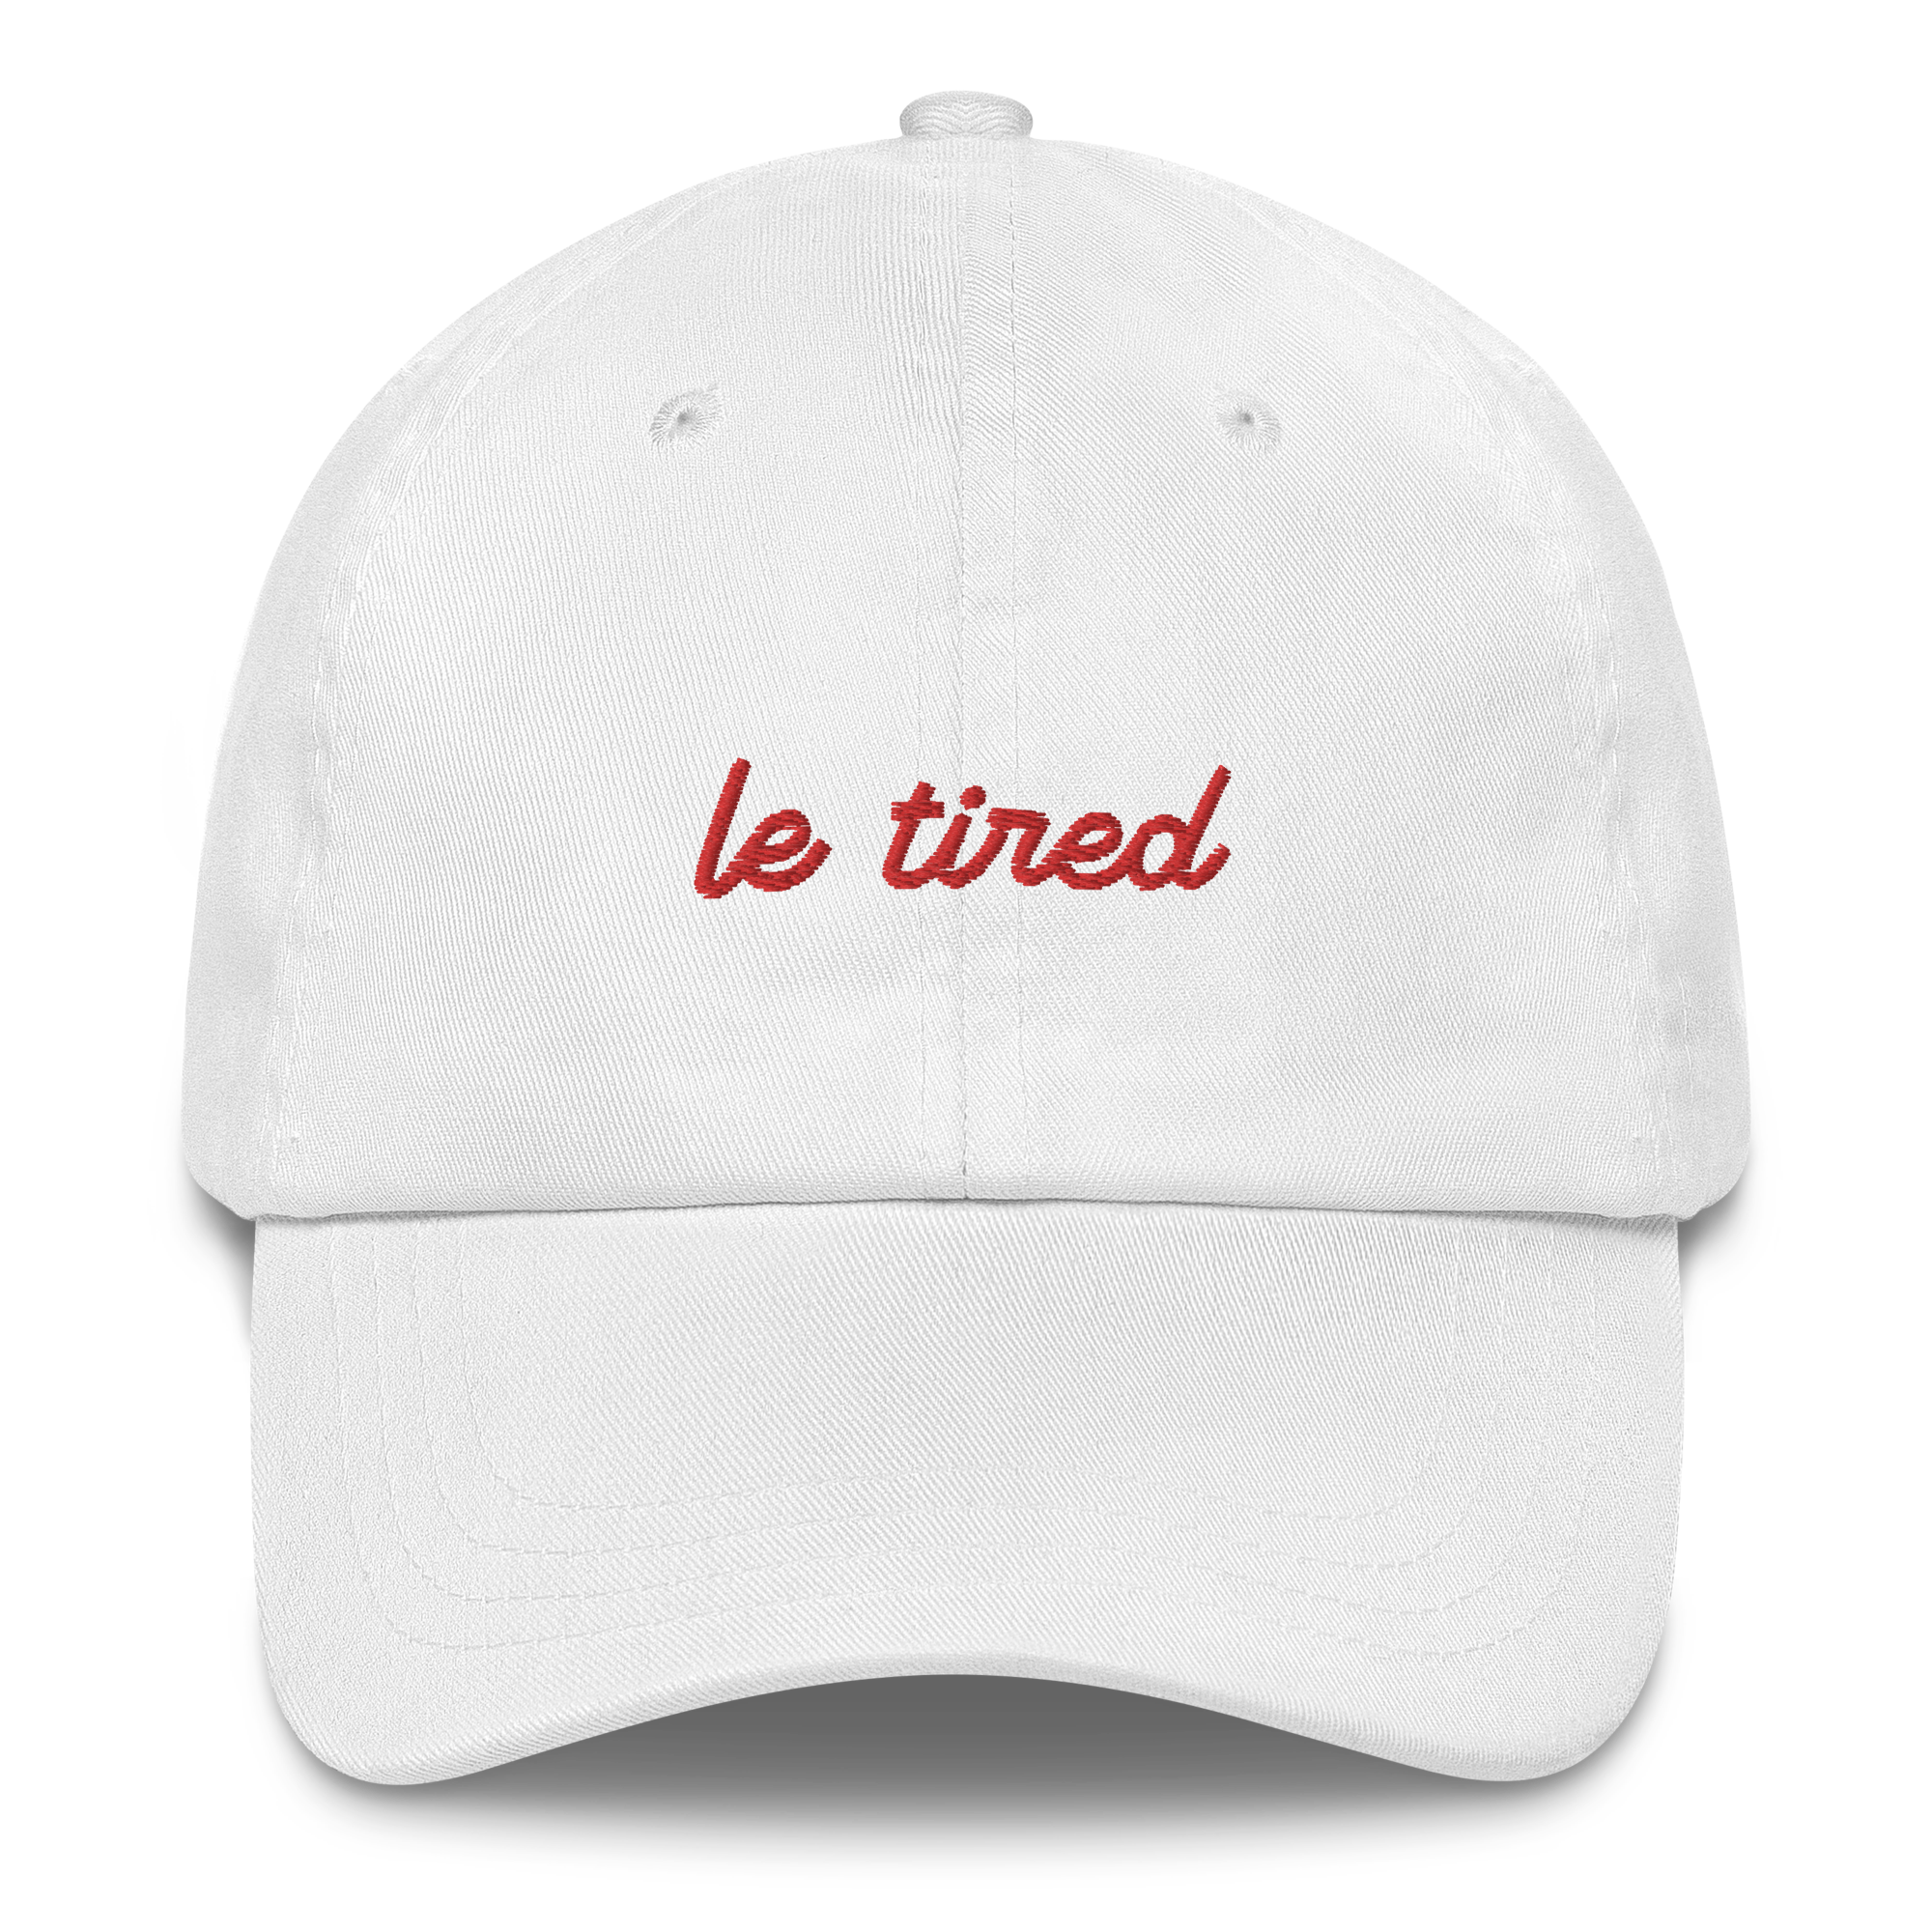 classic-dad-hat-white-front-6671b0fa6d9c2.png